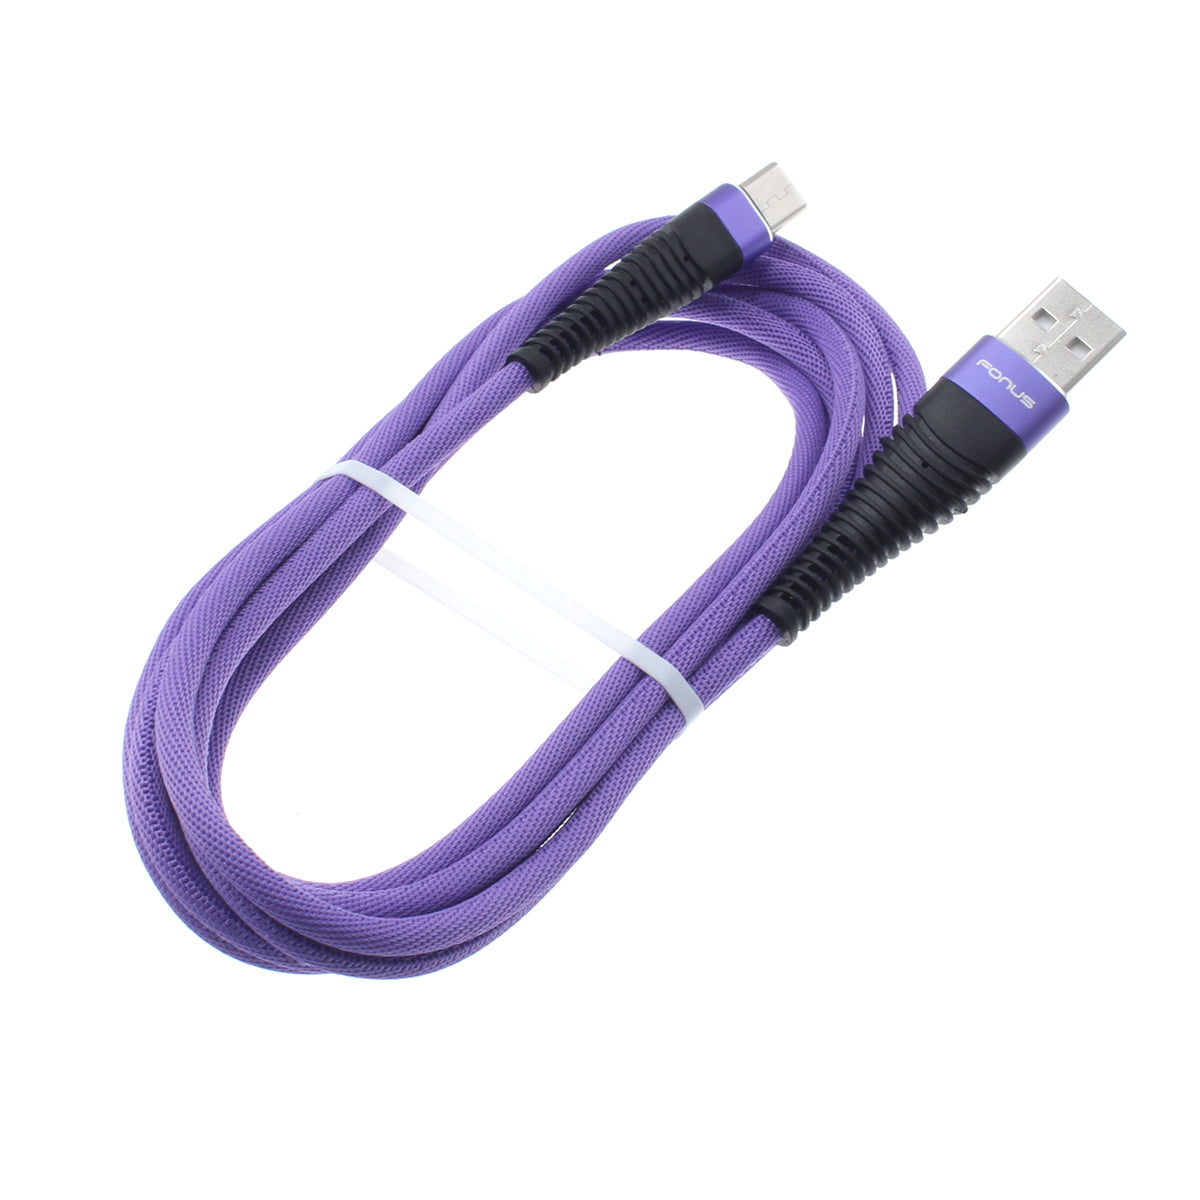 ChargeSync Alloy USB A to USB C Cable – Ventev Mobility